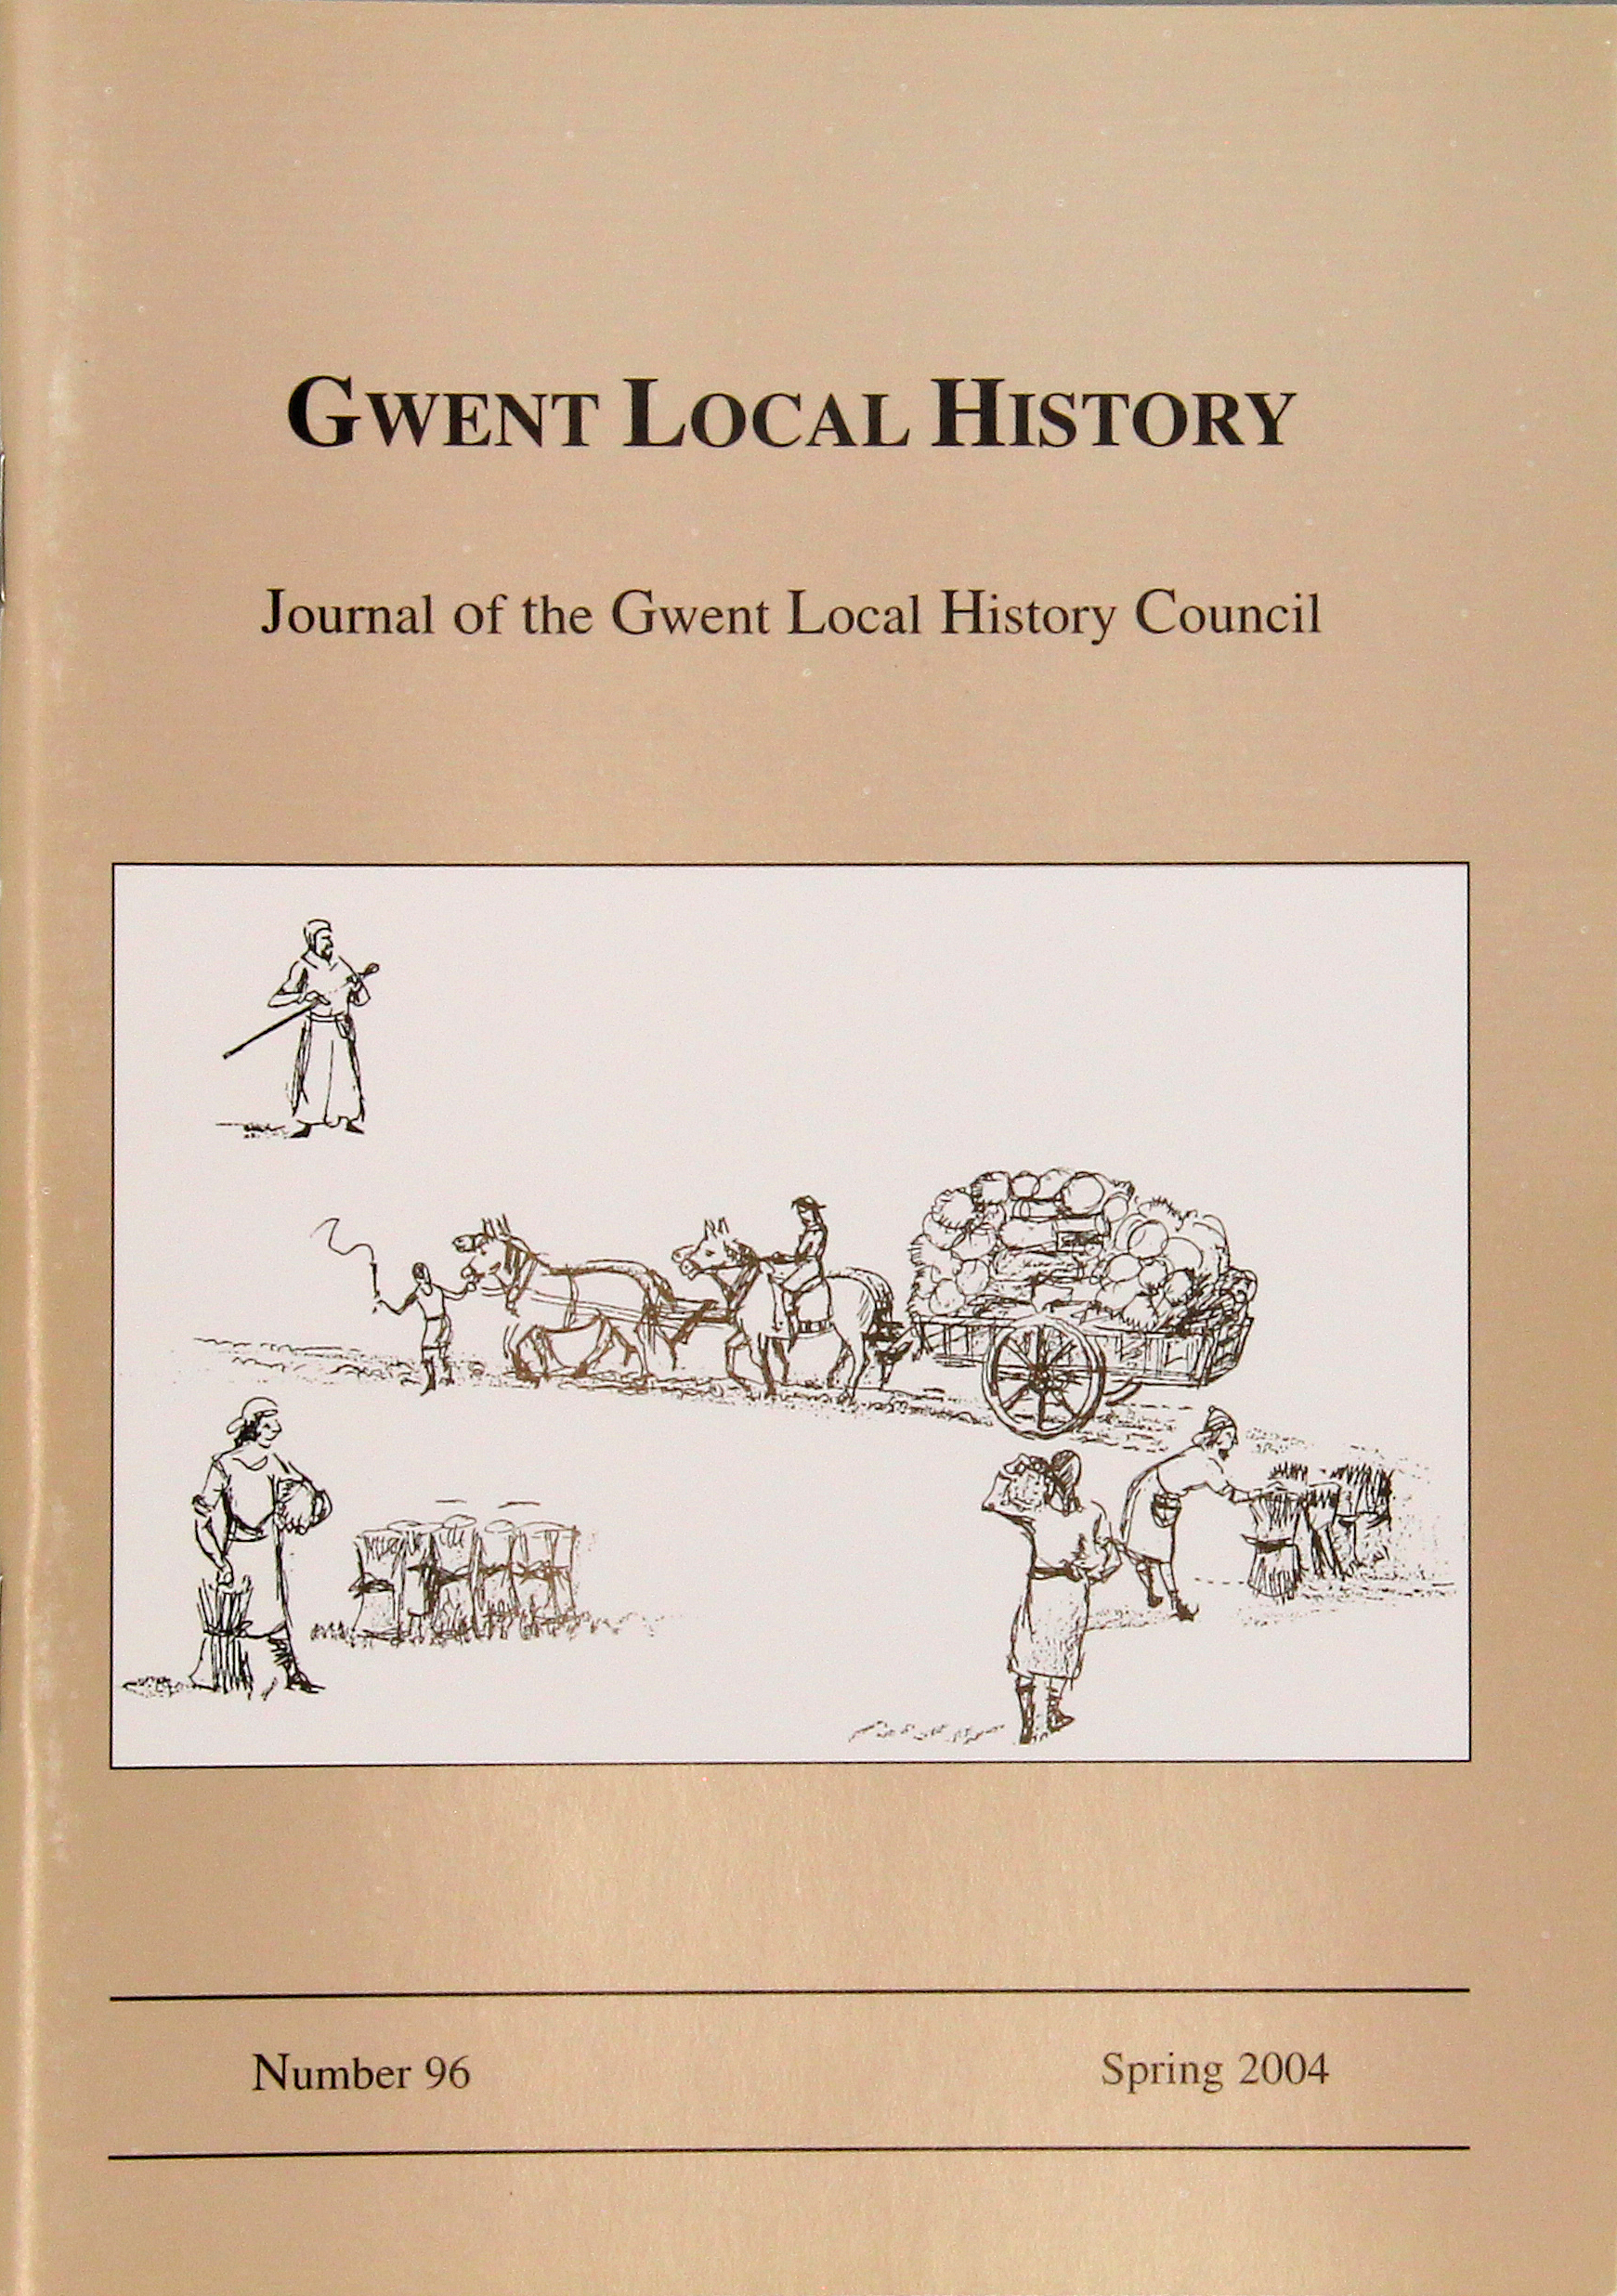 Gwent Local History: Journal of the Gwent Local History Council No.96, Spring 2003, £2.00